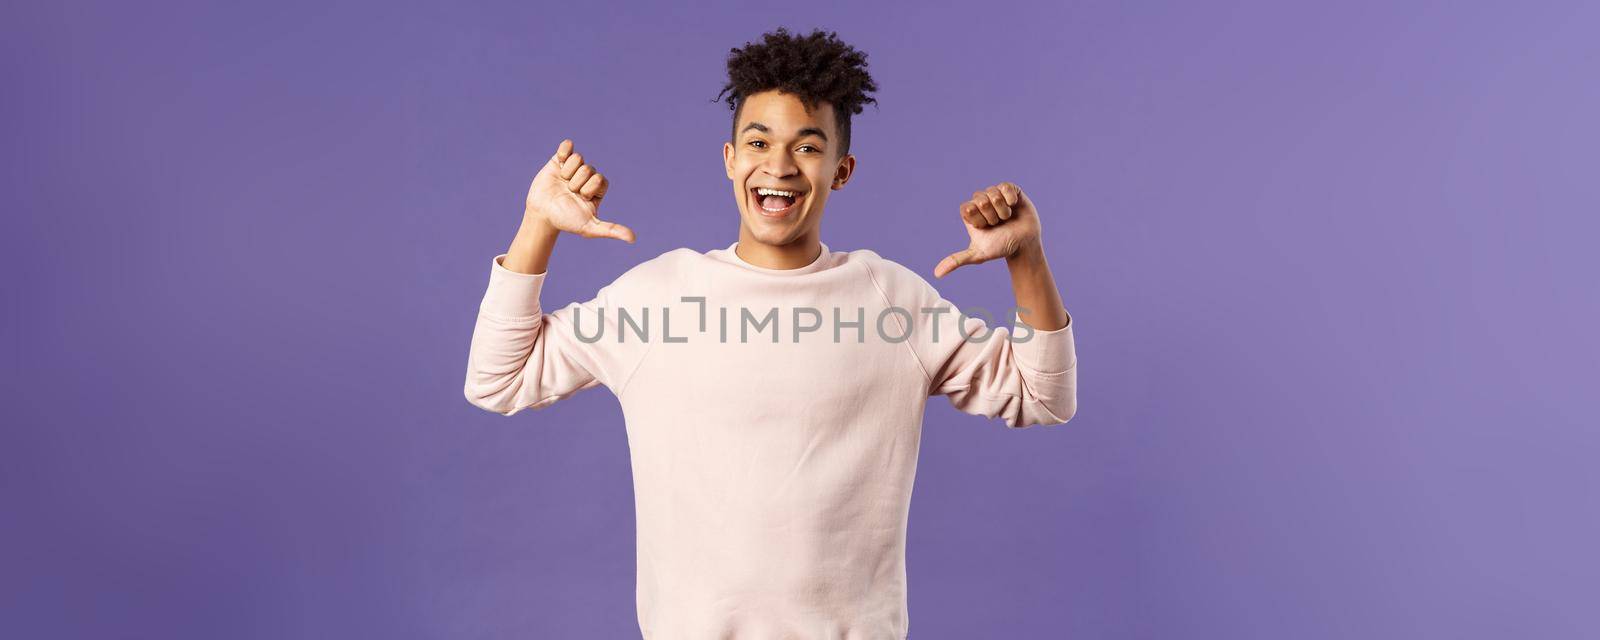 Portrait of confident young upbeat man, smiling bragging, being boastful about own accomplishments, indicate himself with proud rejoicing face, standing purple background.